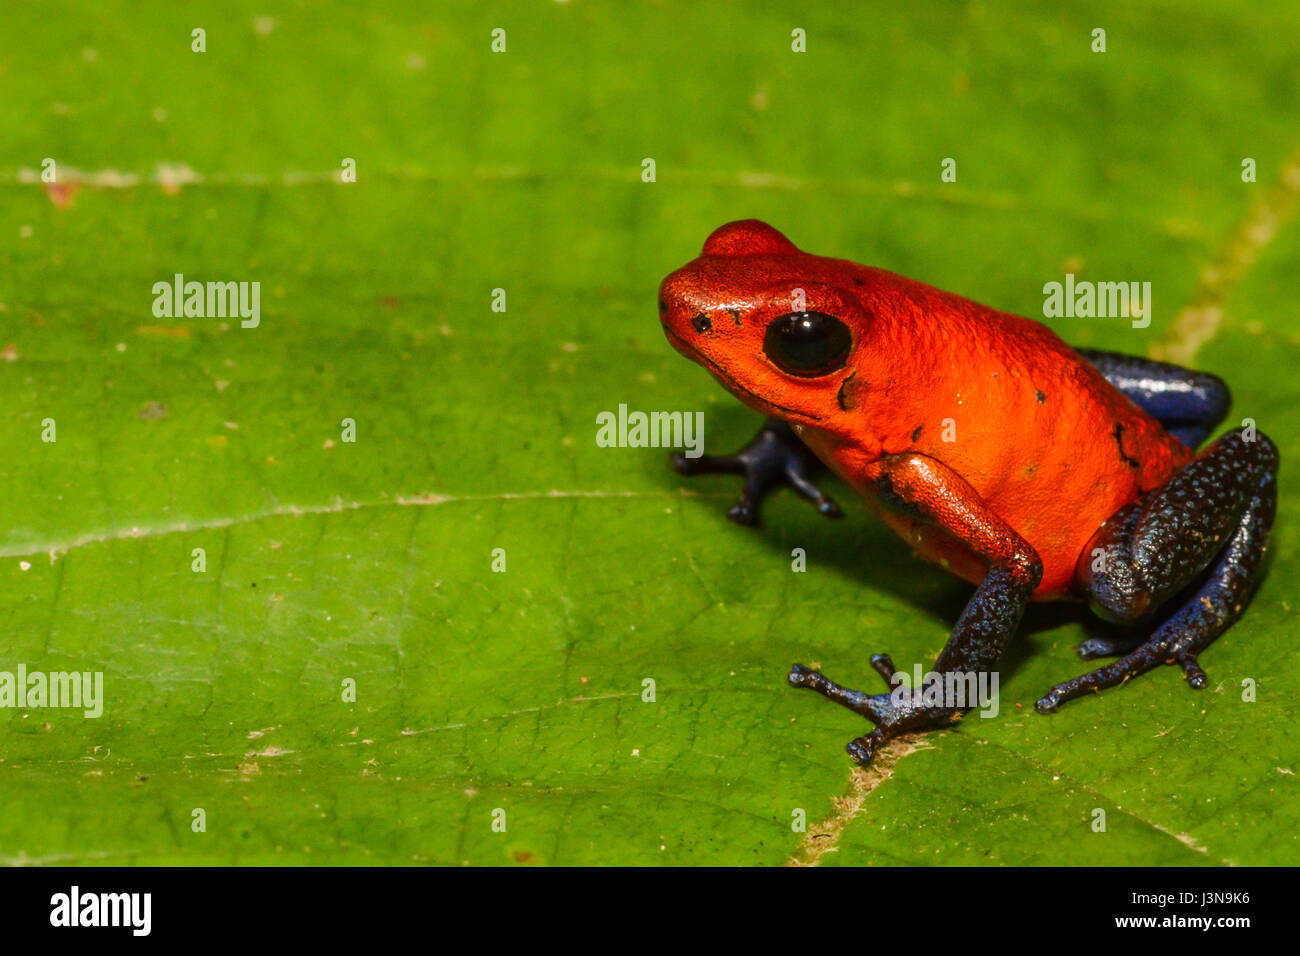 A close up of a Strawberry Poison Dart Frog in Costa Rica Stock Photo